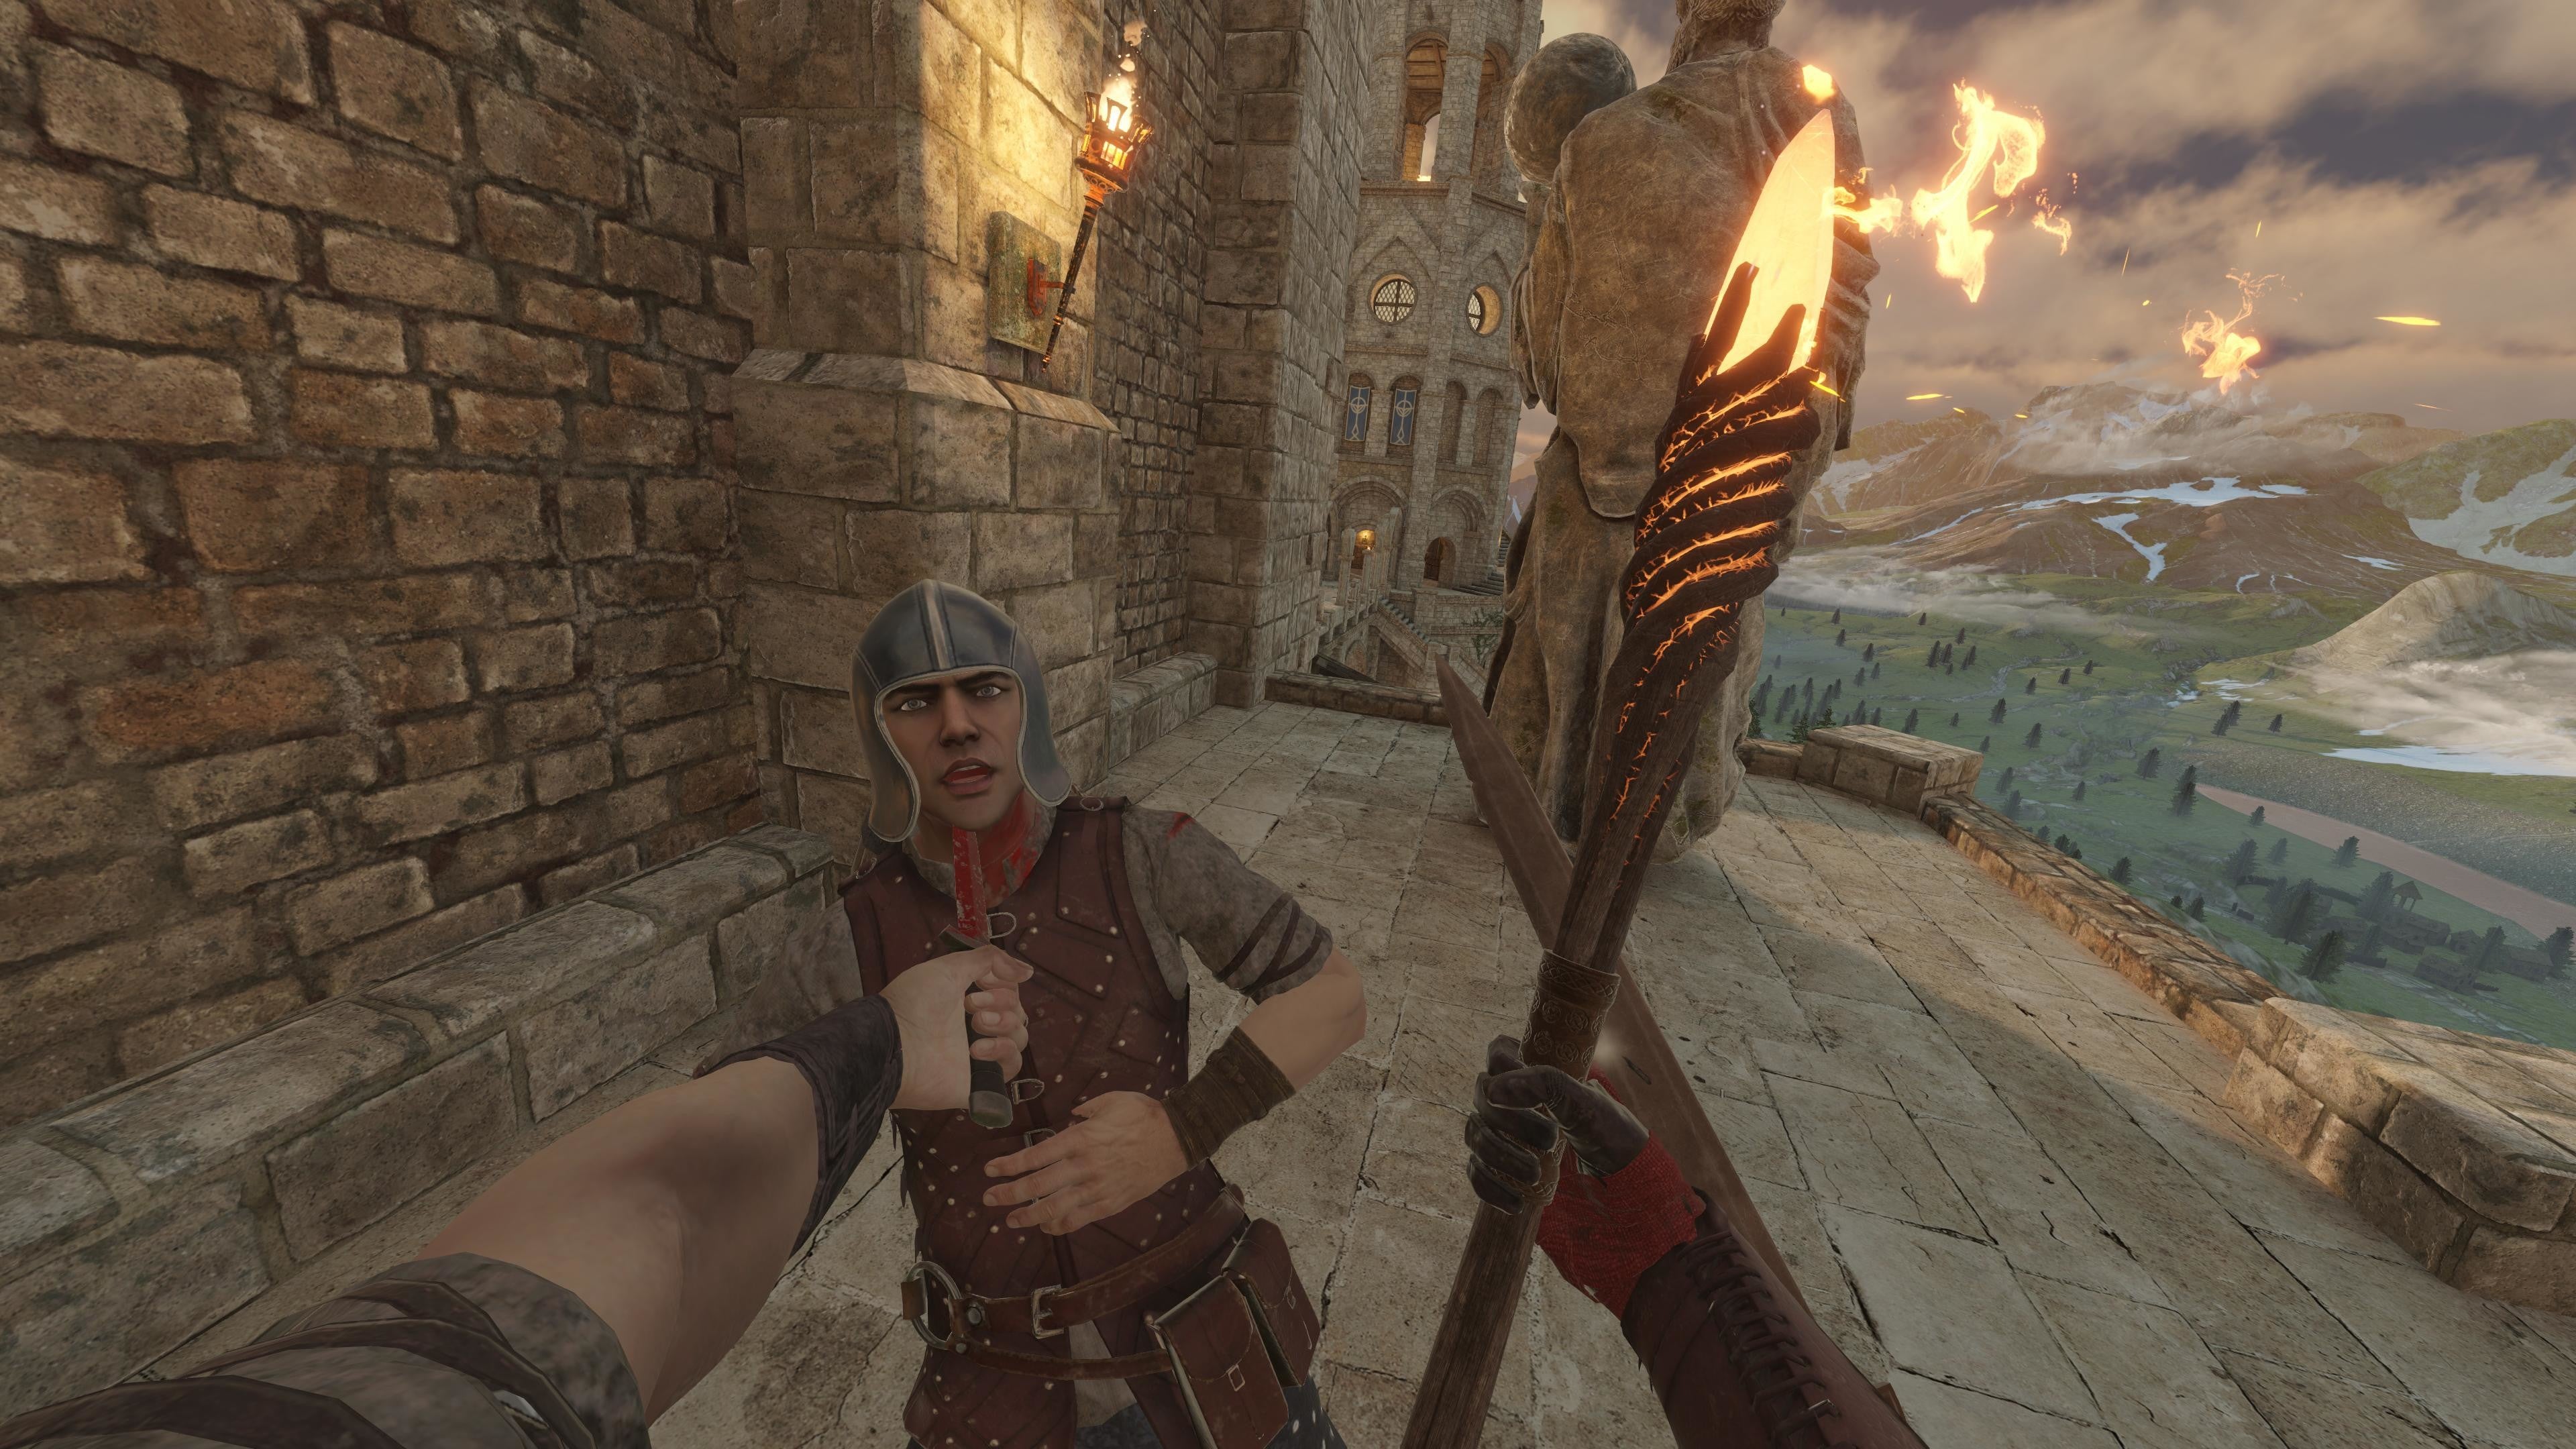 Holding a fire staff in one hand and stabbing a soldier with the blade in your right hand, in the VR combat game Blade And Sorcery